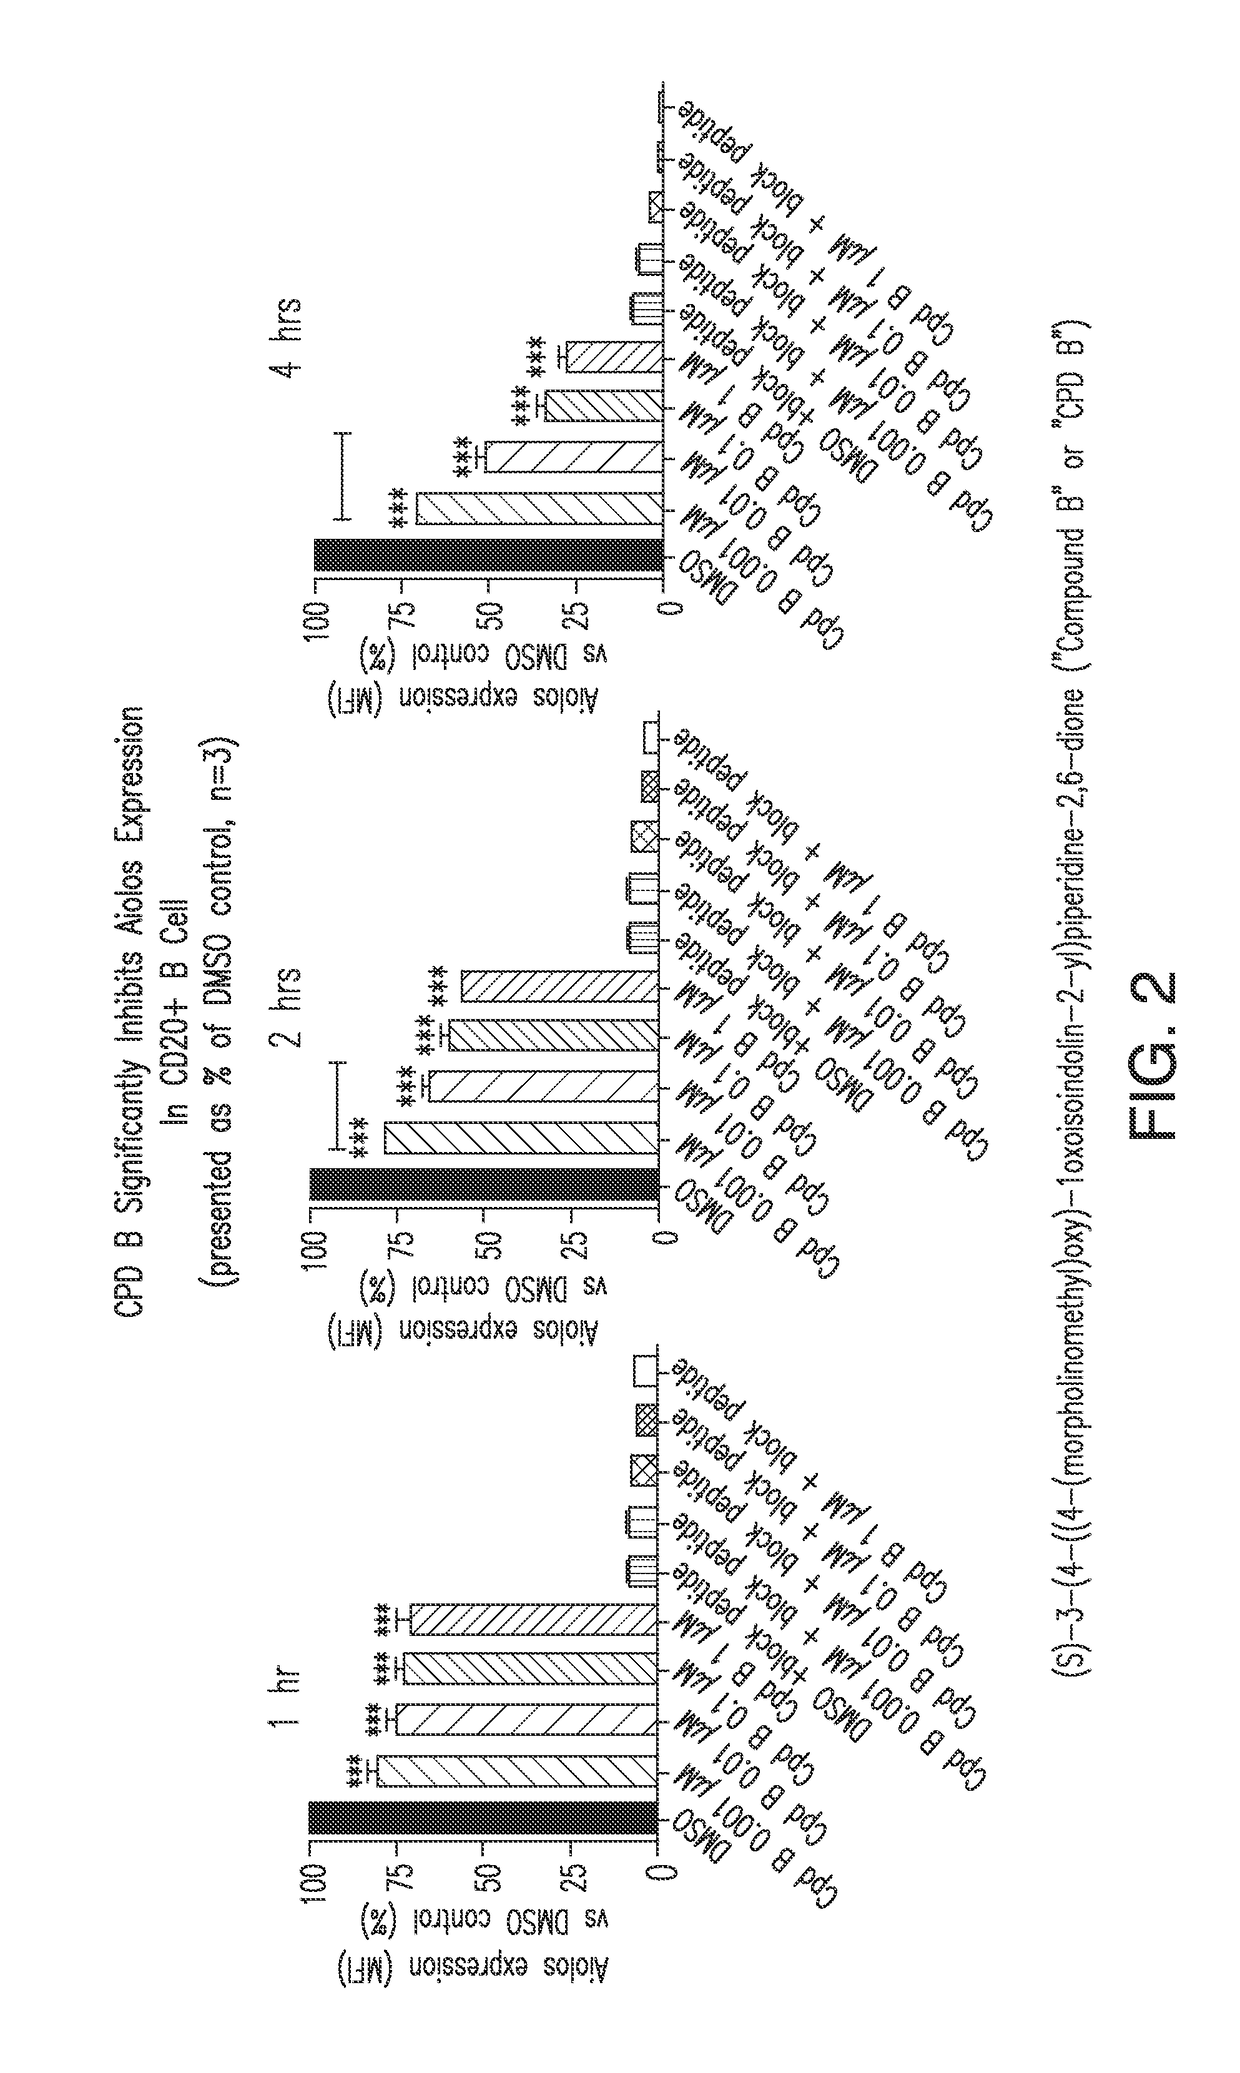 Methods for the treatment of locally advanced breast cancer